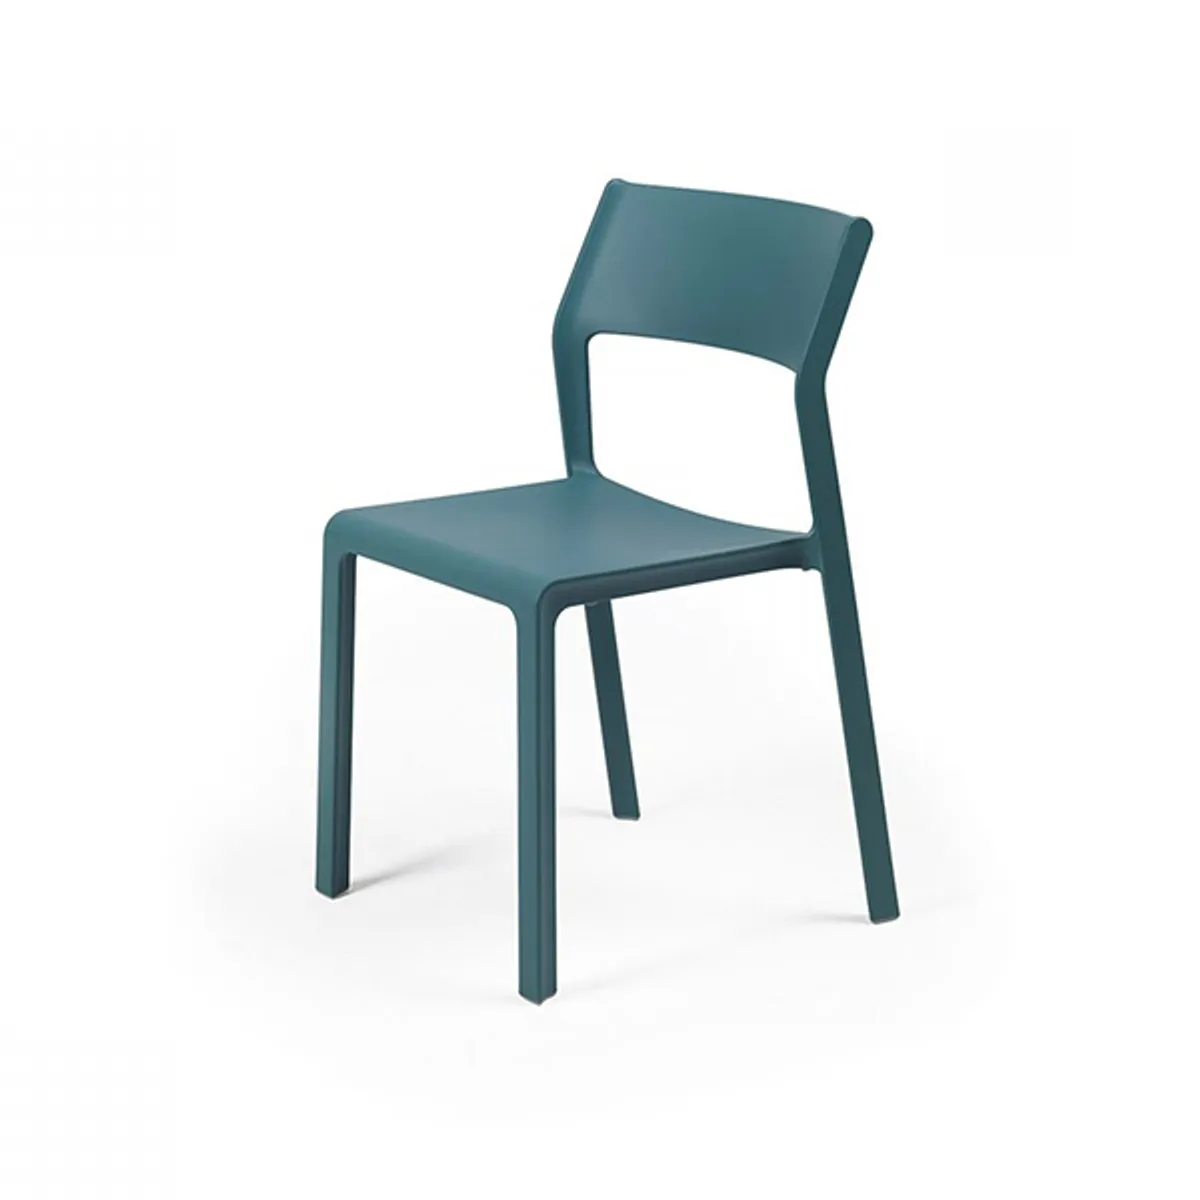 Trill Side Chair Fibreglass Chair For Outdoor In Blue